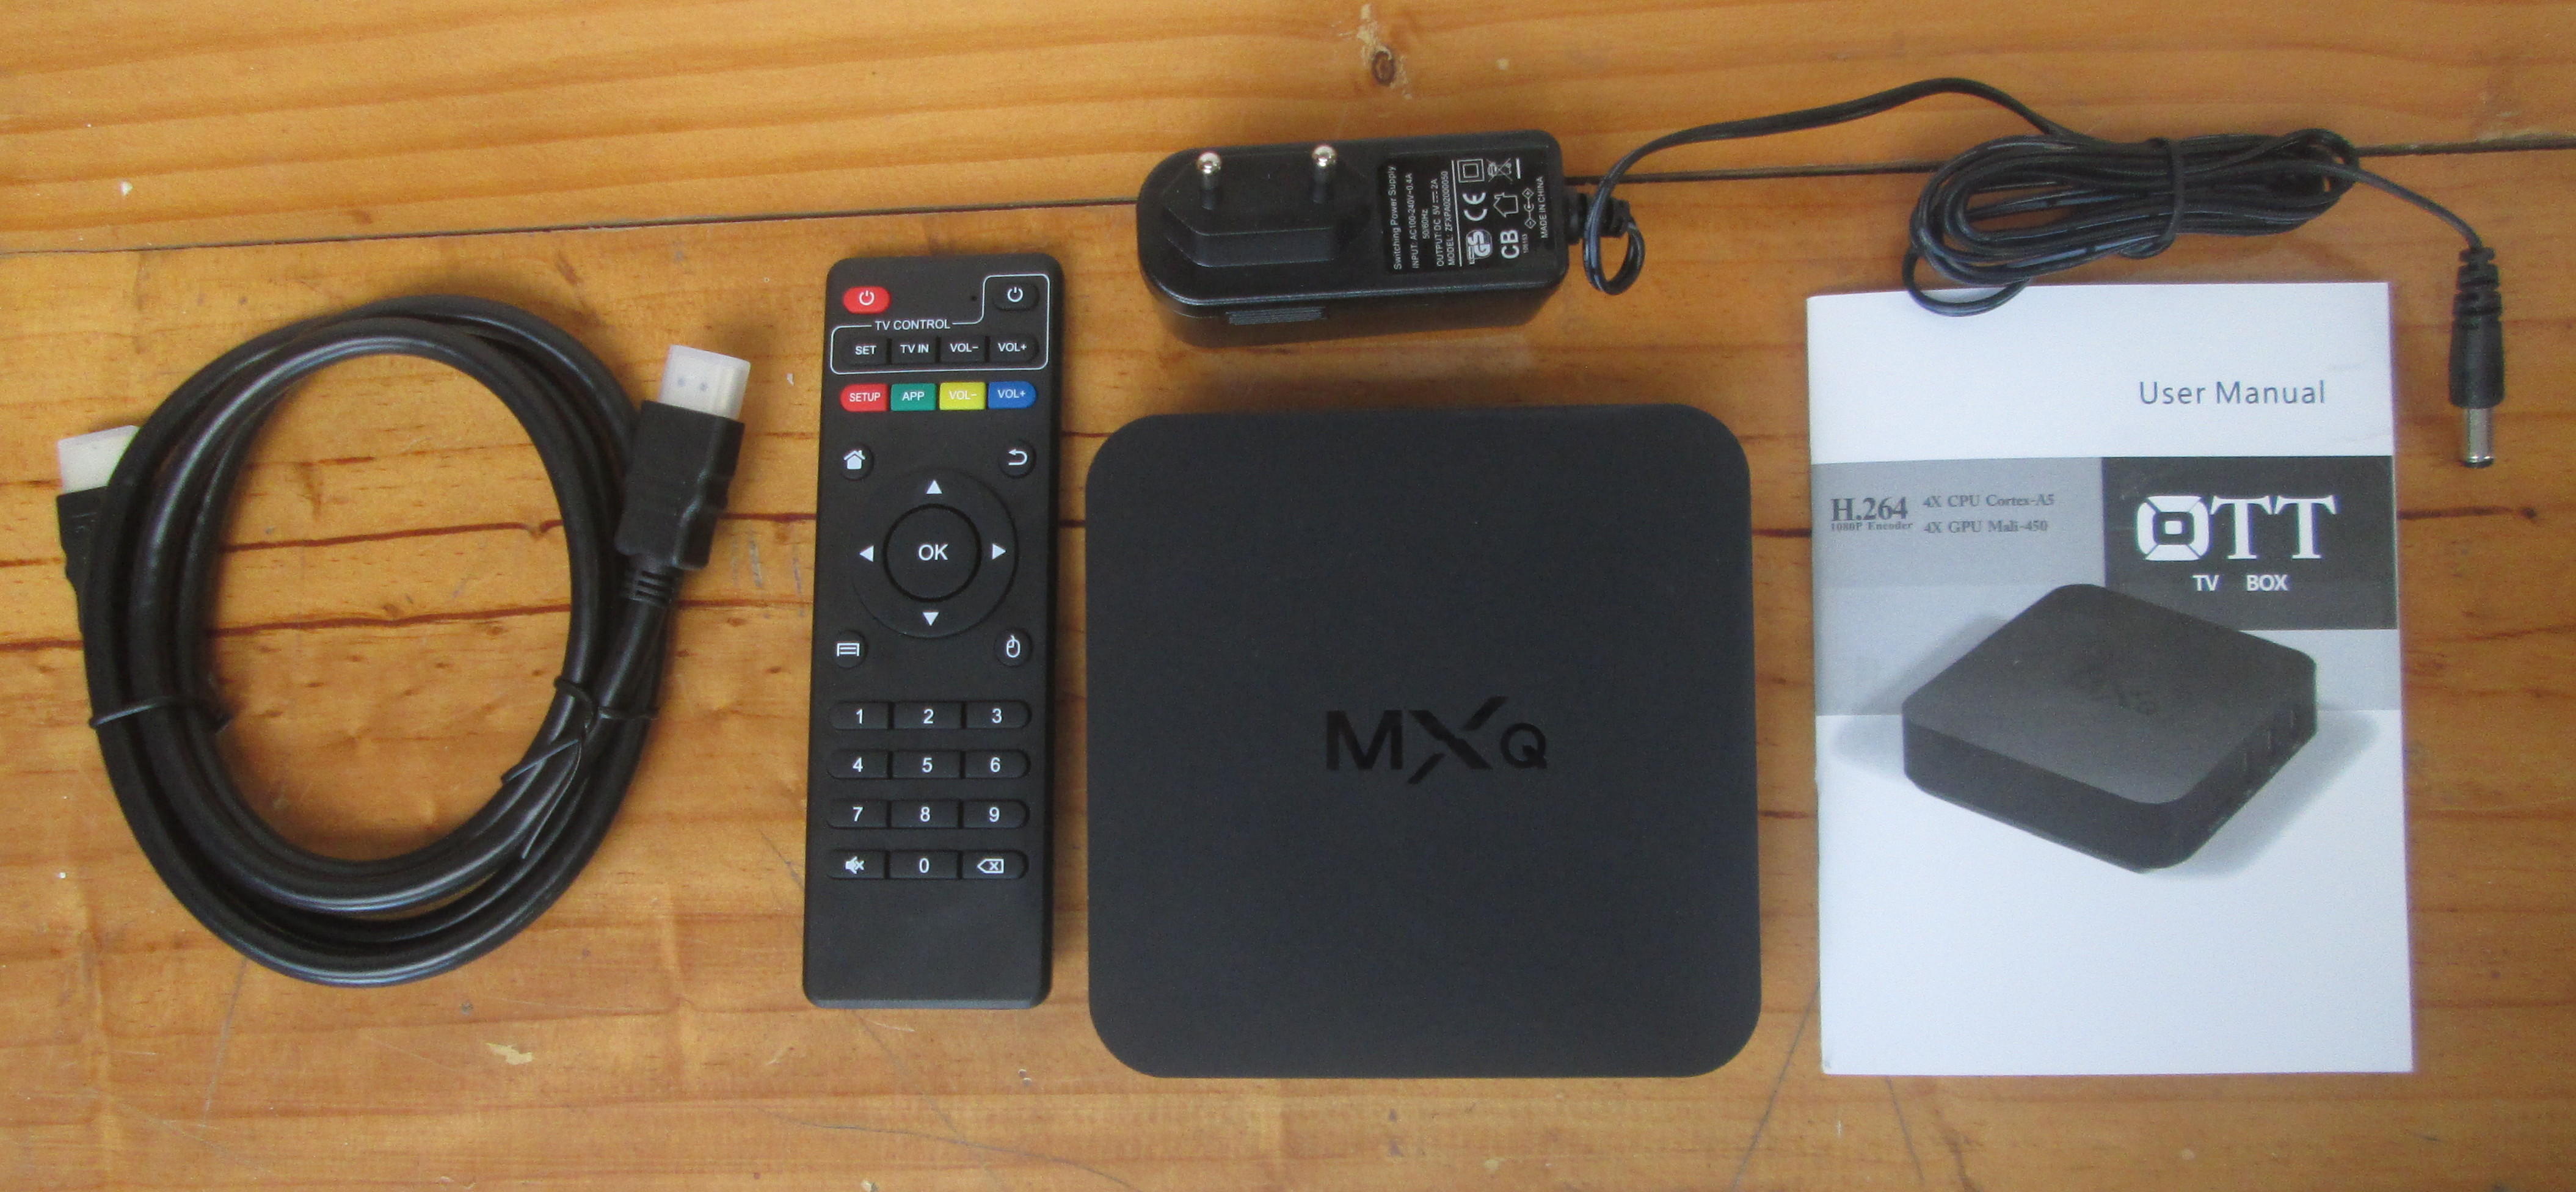 Unboxing of Eny EM6Q-MXQ Android TV Box Powered by Amlogic S805 Processor